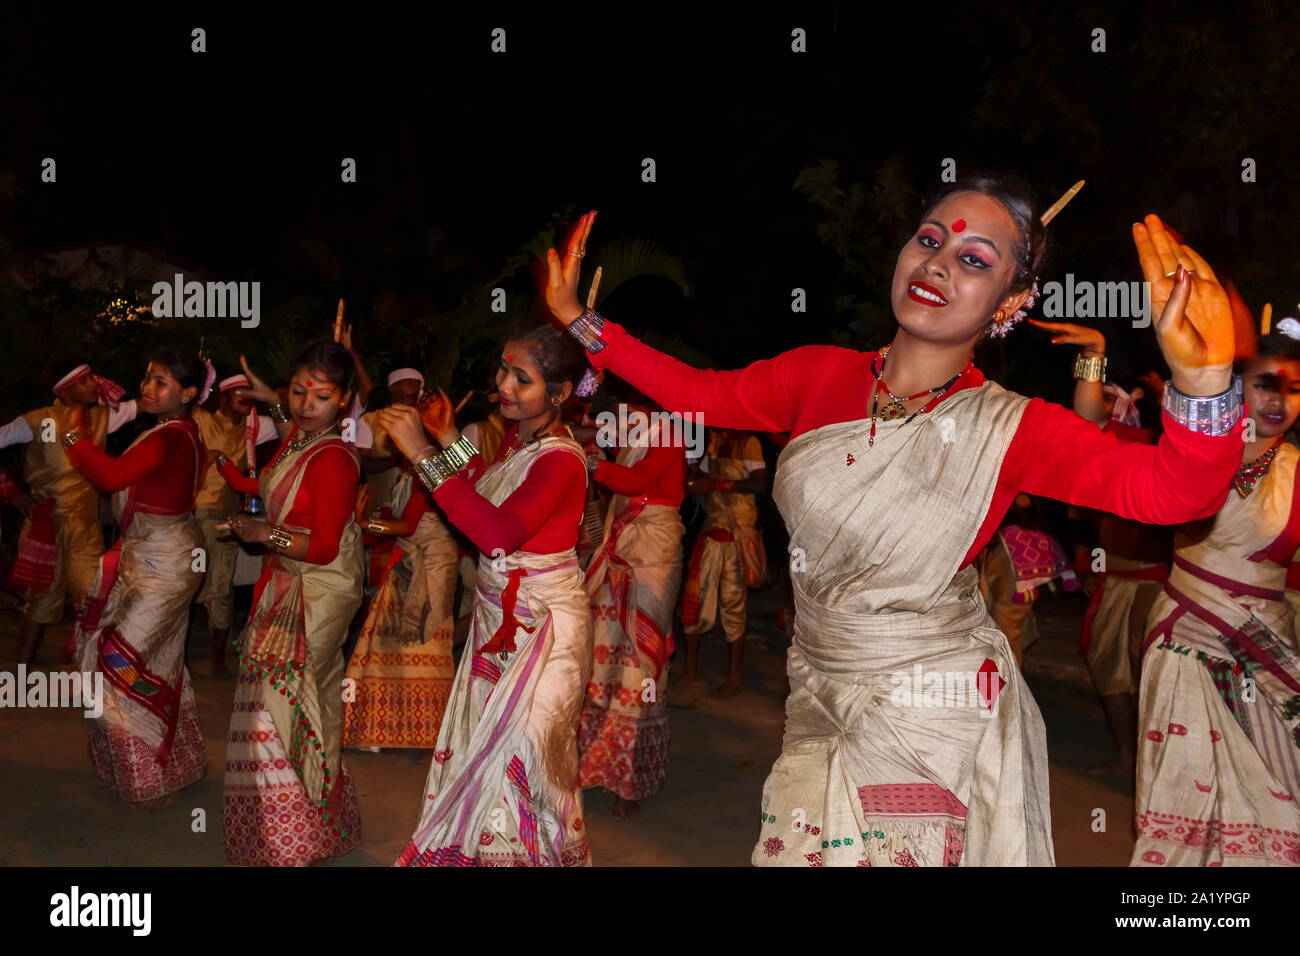 Smiling young local women dancers in traditional dress perform at an Indian New Year dance in Kaziranga, Golaghat District, Bochagaon, Assam, India Stock Photo